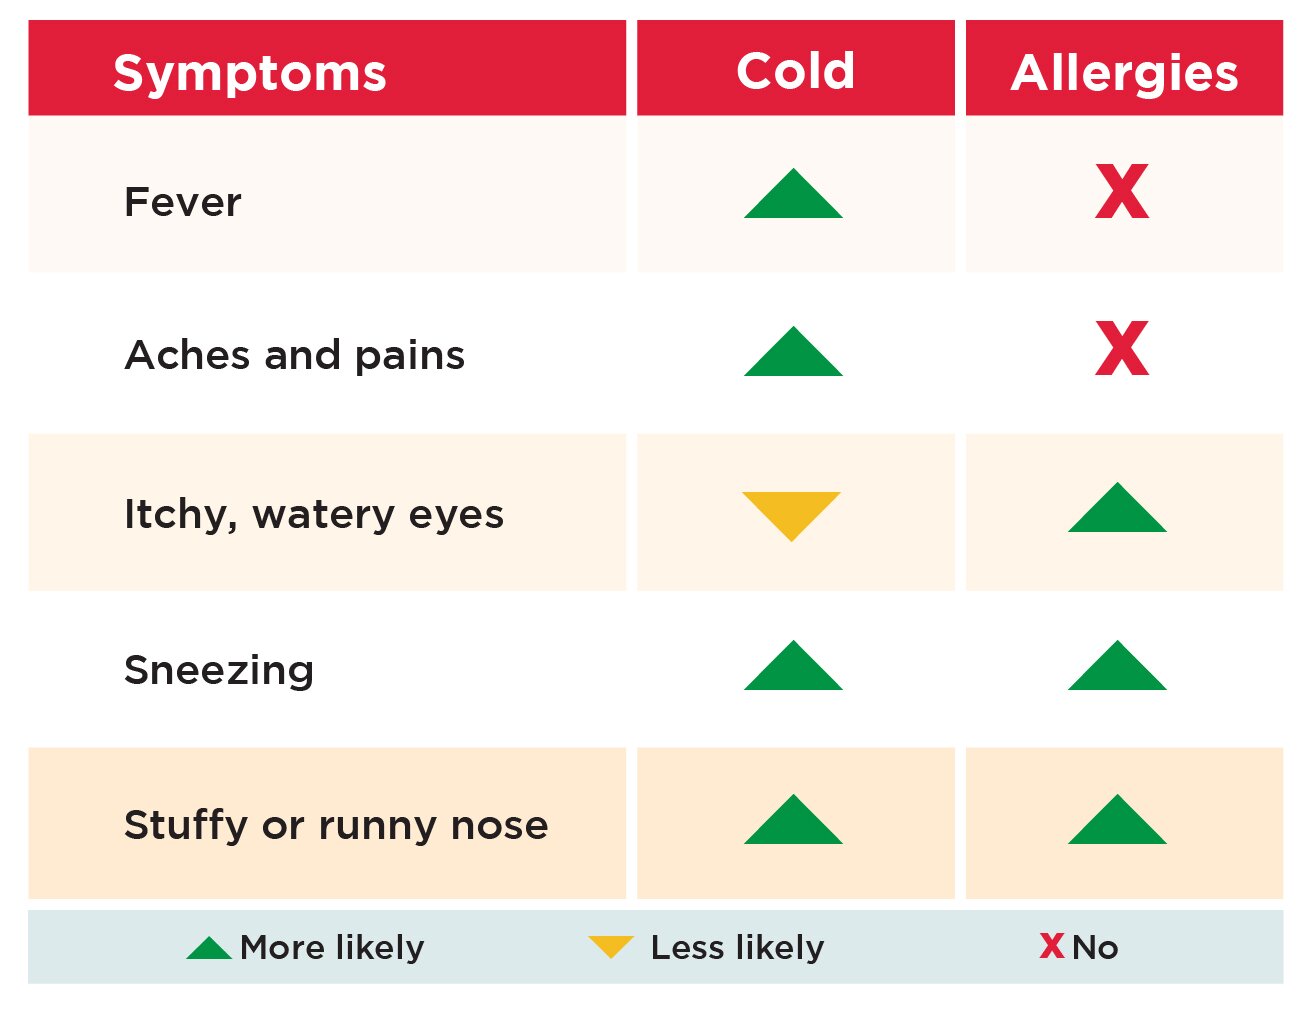 A chart showing the different symptoms between allergies and cold